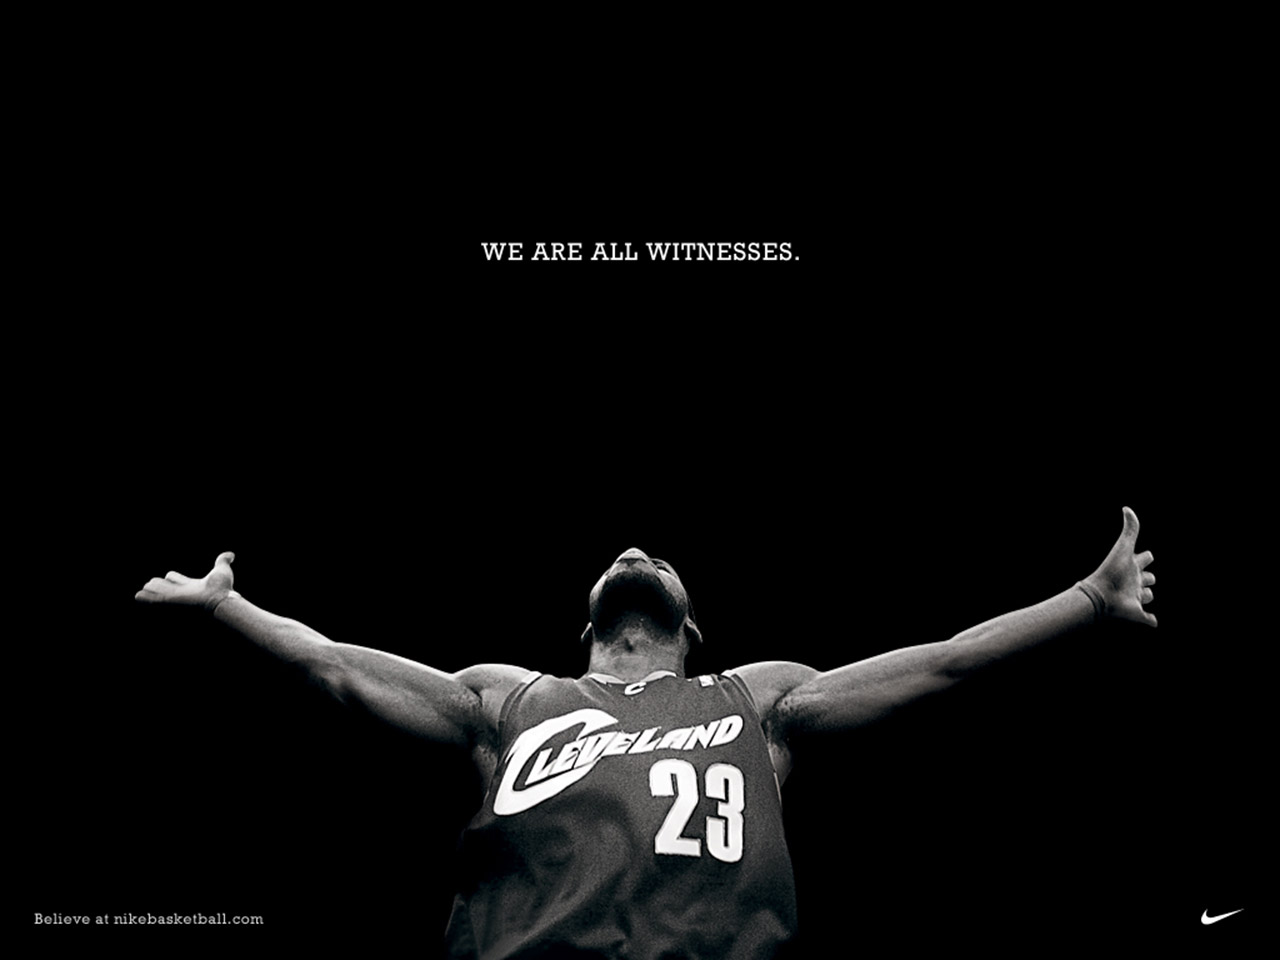  be one very old wallpaper made by NikeBasketball.com with LeBron trowing 